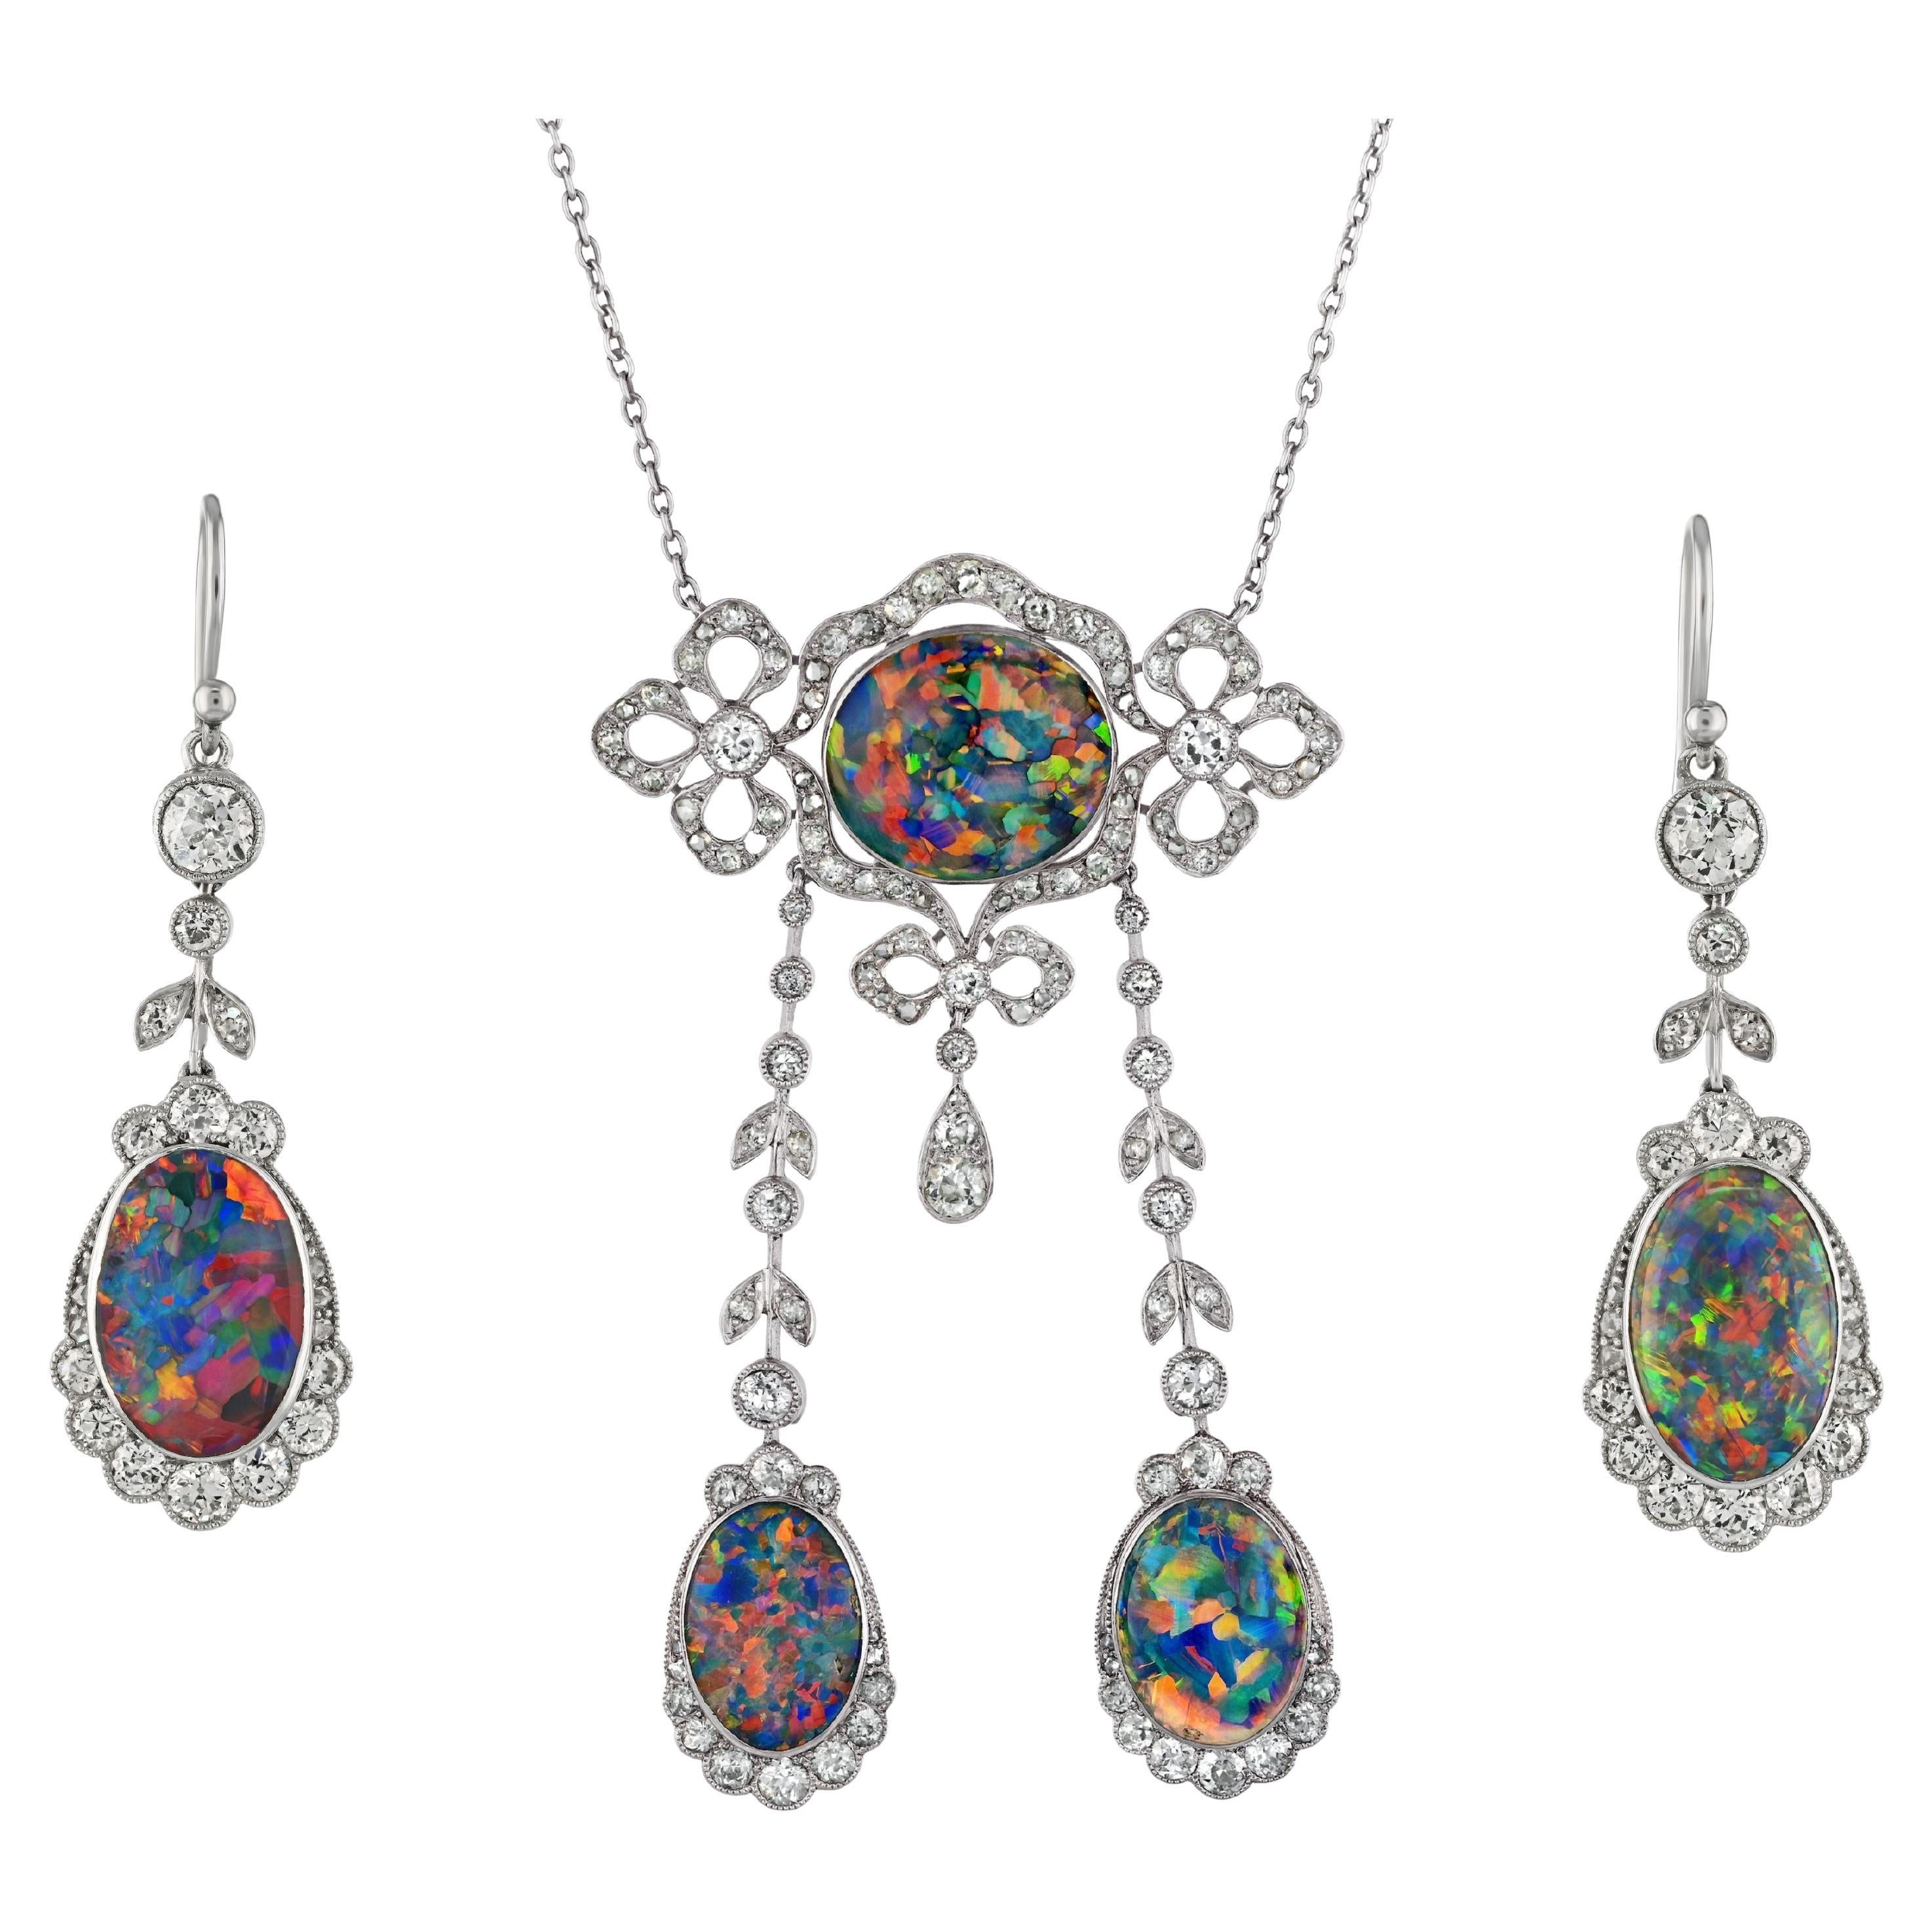 Antique Natural Black Opal and Old Euro Diamond Drop Earring & Necklace Set